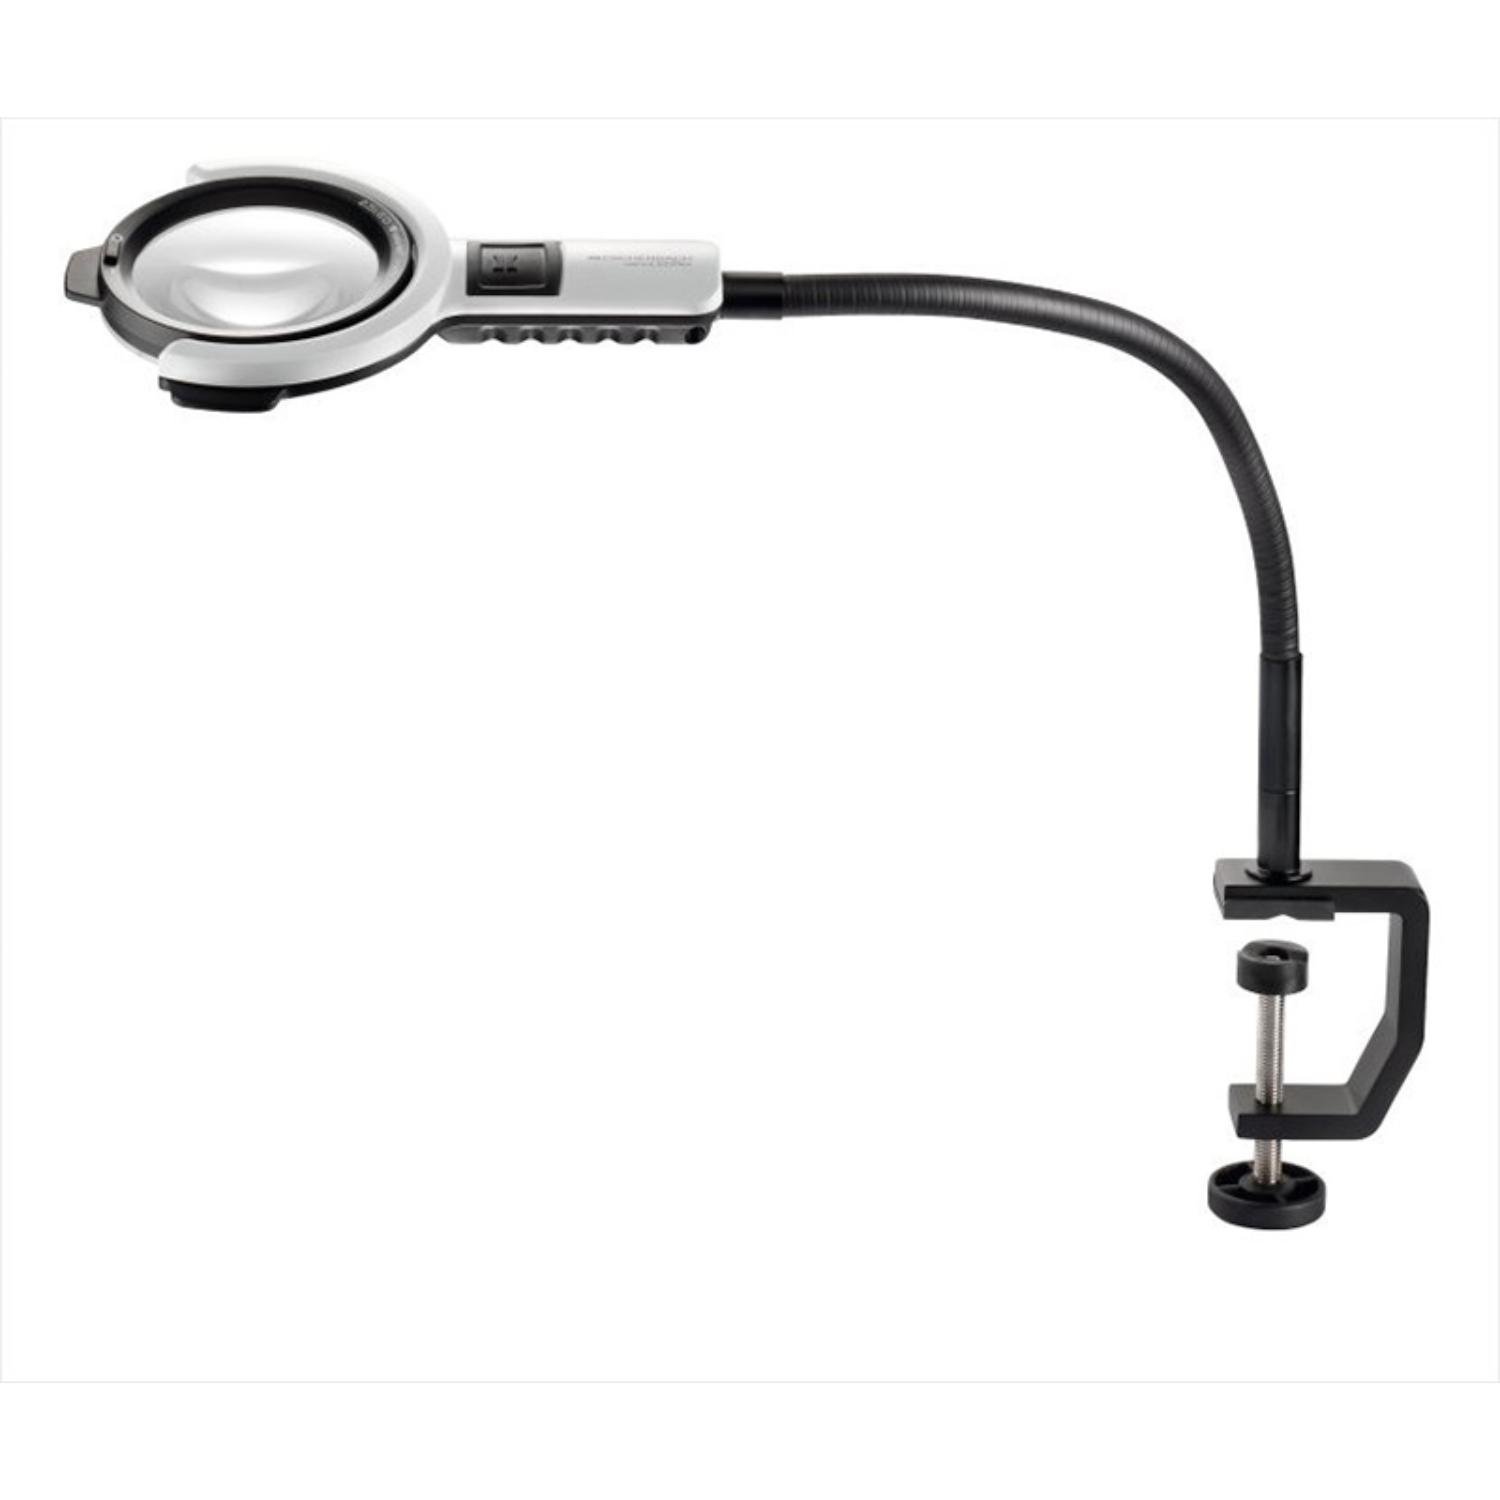 Image of Vario LED Flex Lamp with 14" neck from Eschenbach Optik